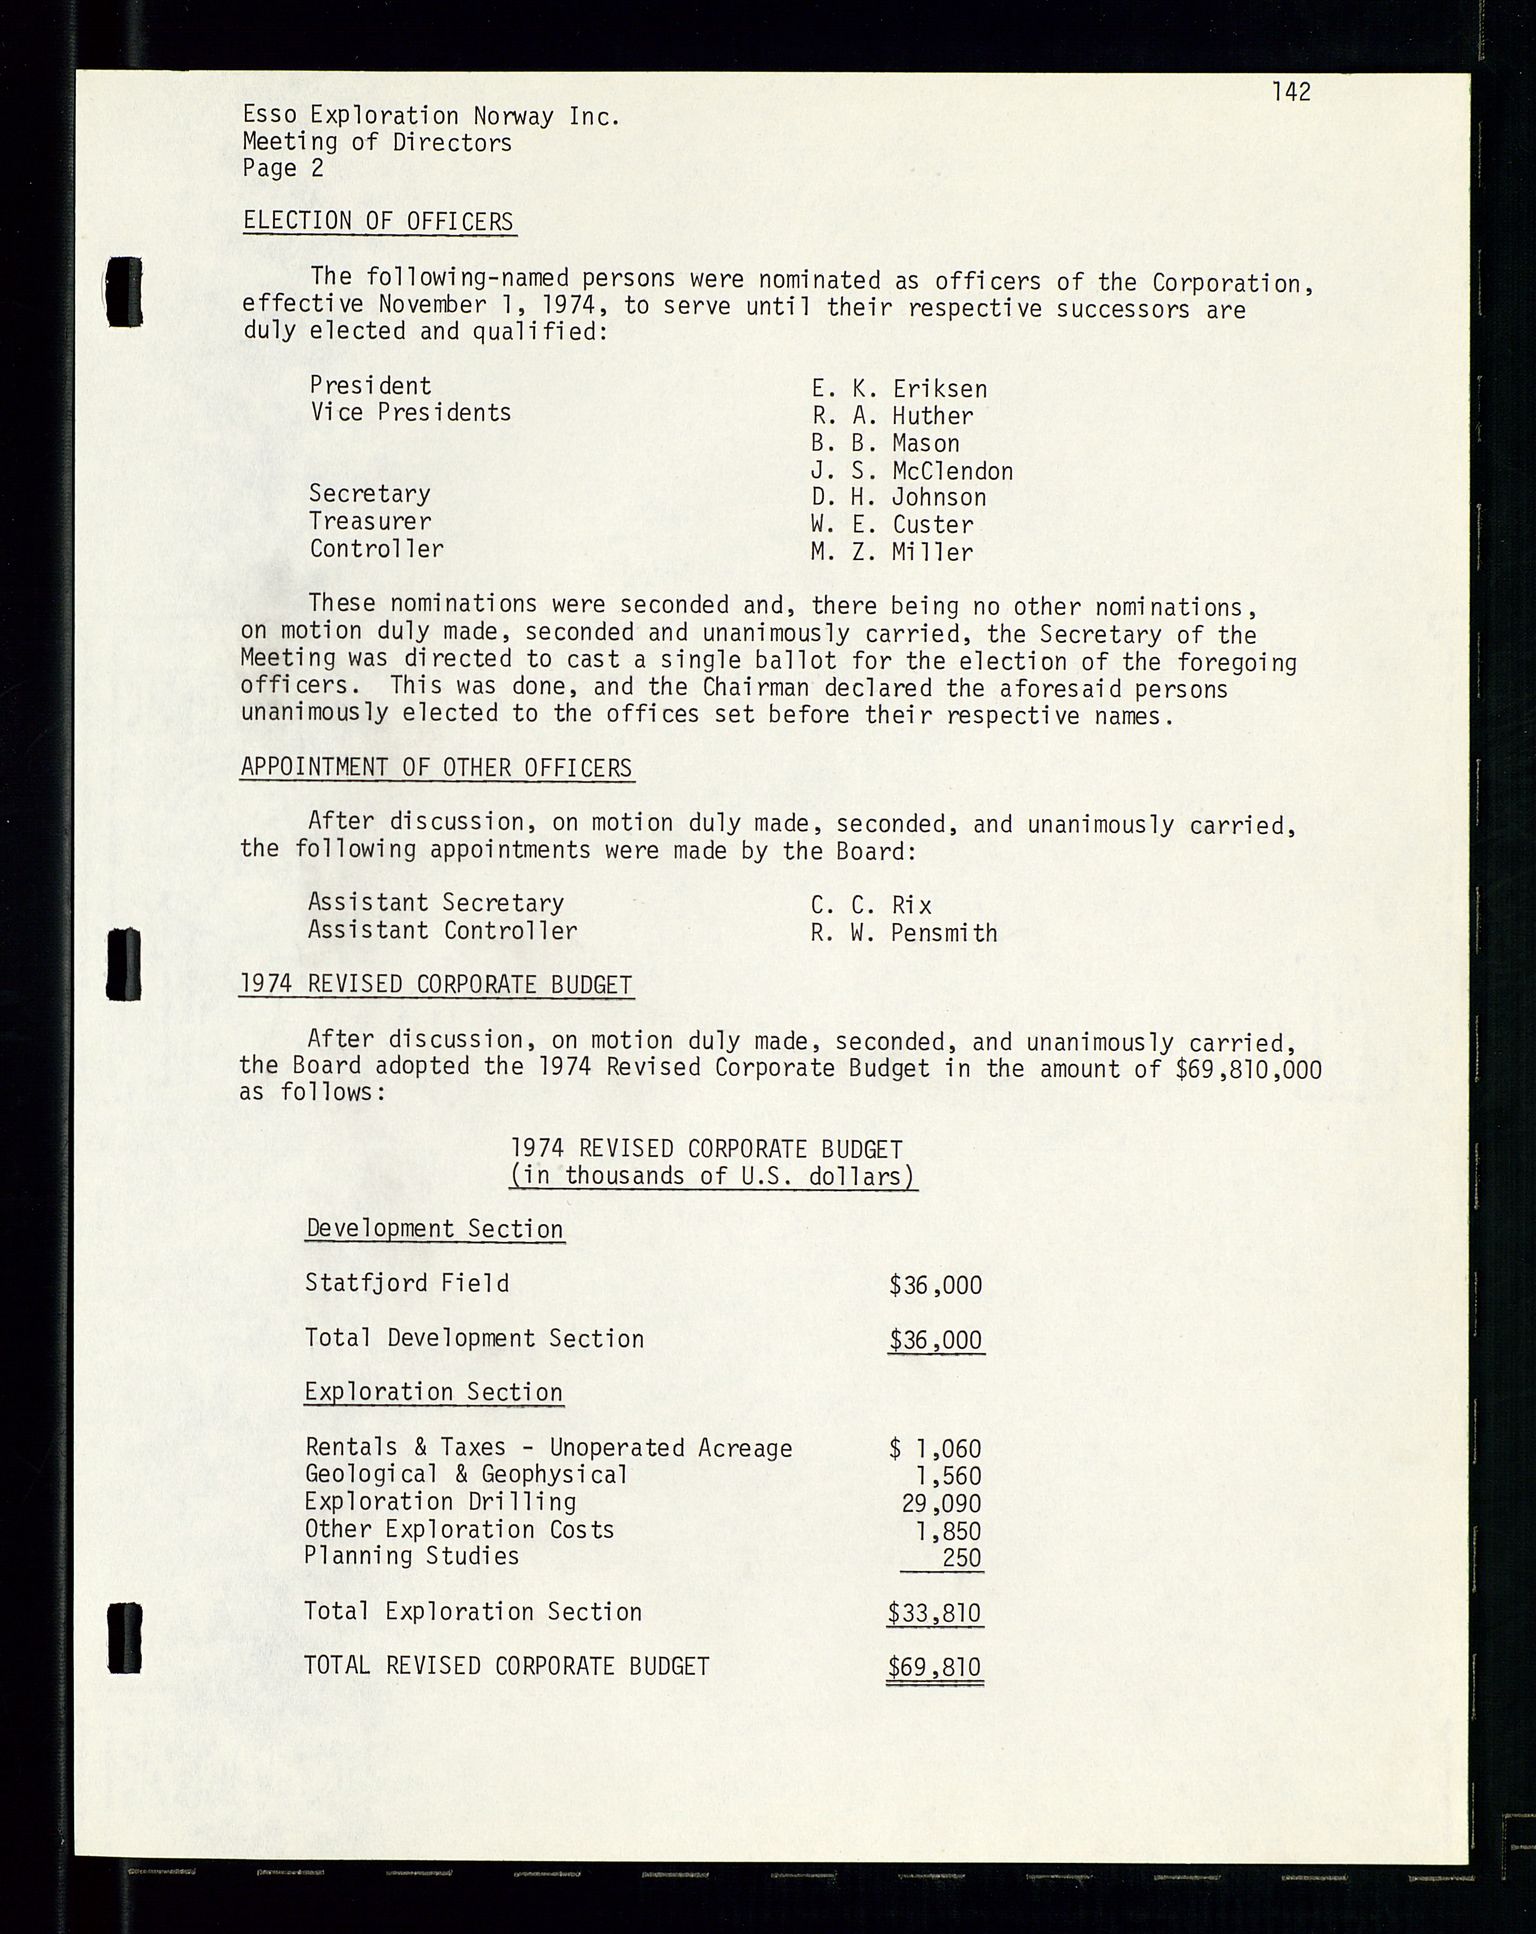 Pa 1512 - Esso Exploration and Production Norway Inc., SAST/A-101917/A/Aa/L0001/0001: Styredokumenter / Corporate records, By-Laws, Board meeting minutes, Incorporations, 1965-1975, s. 142